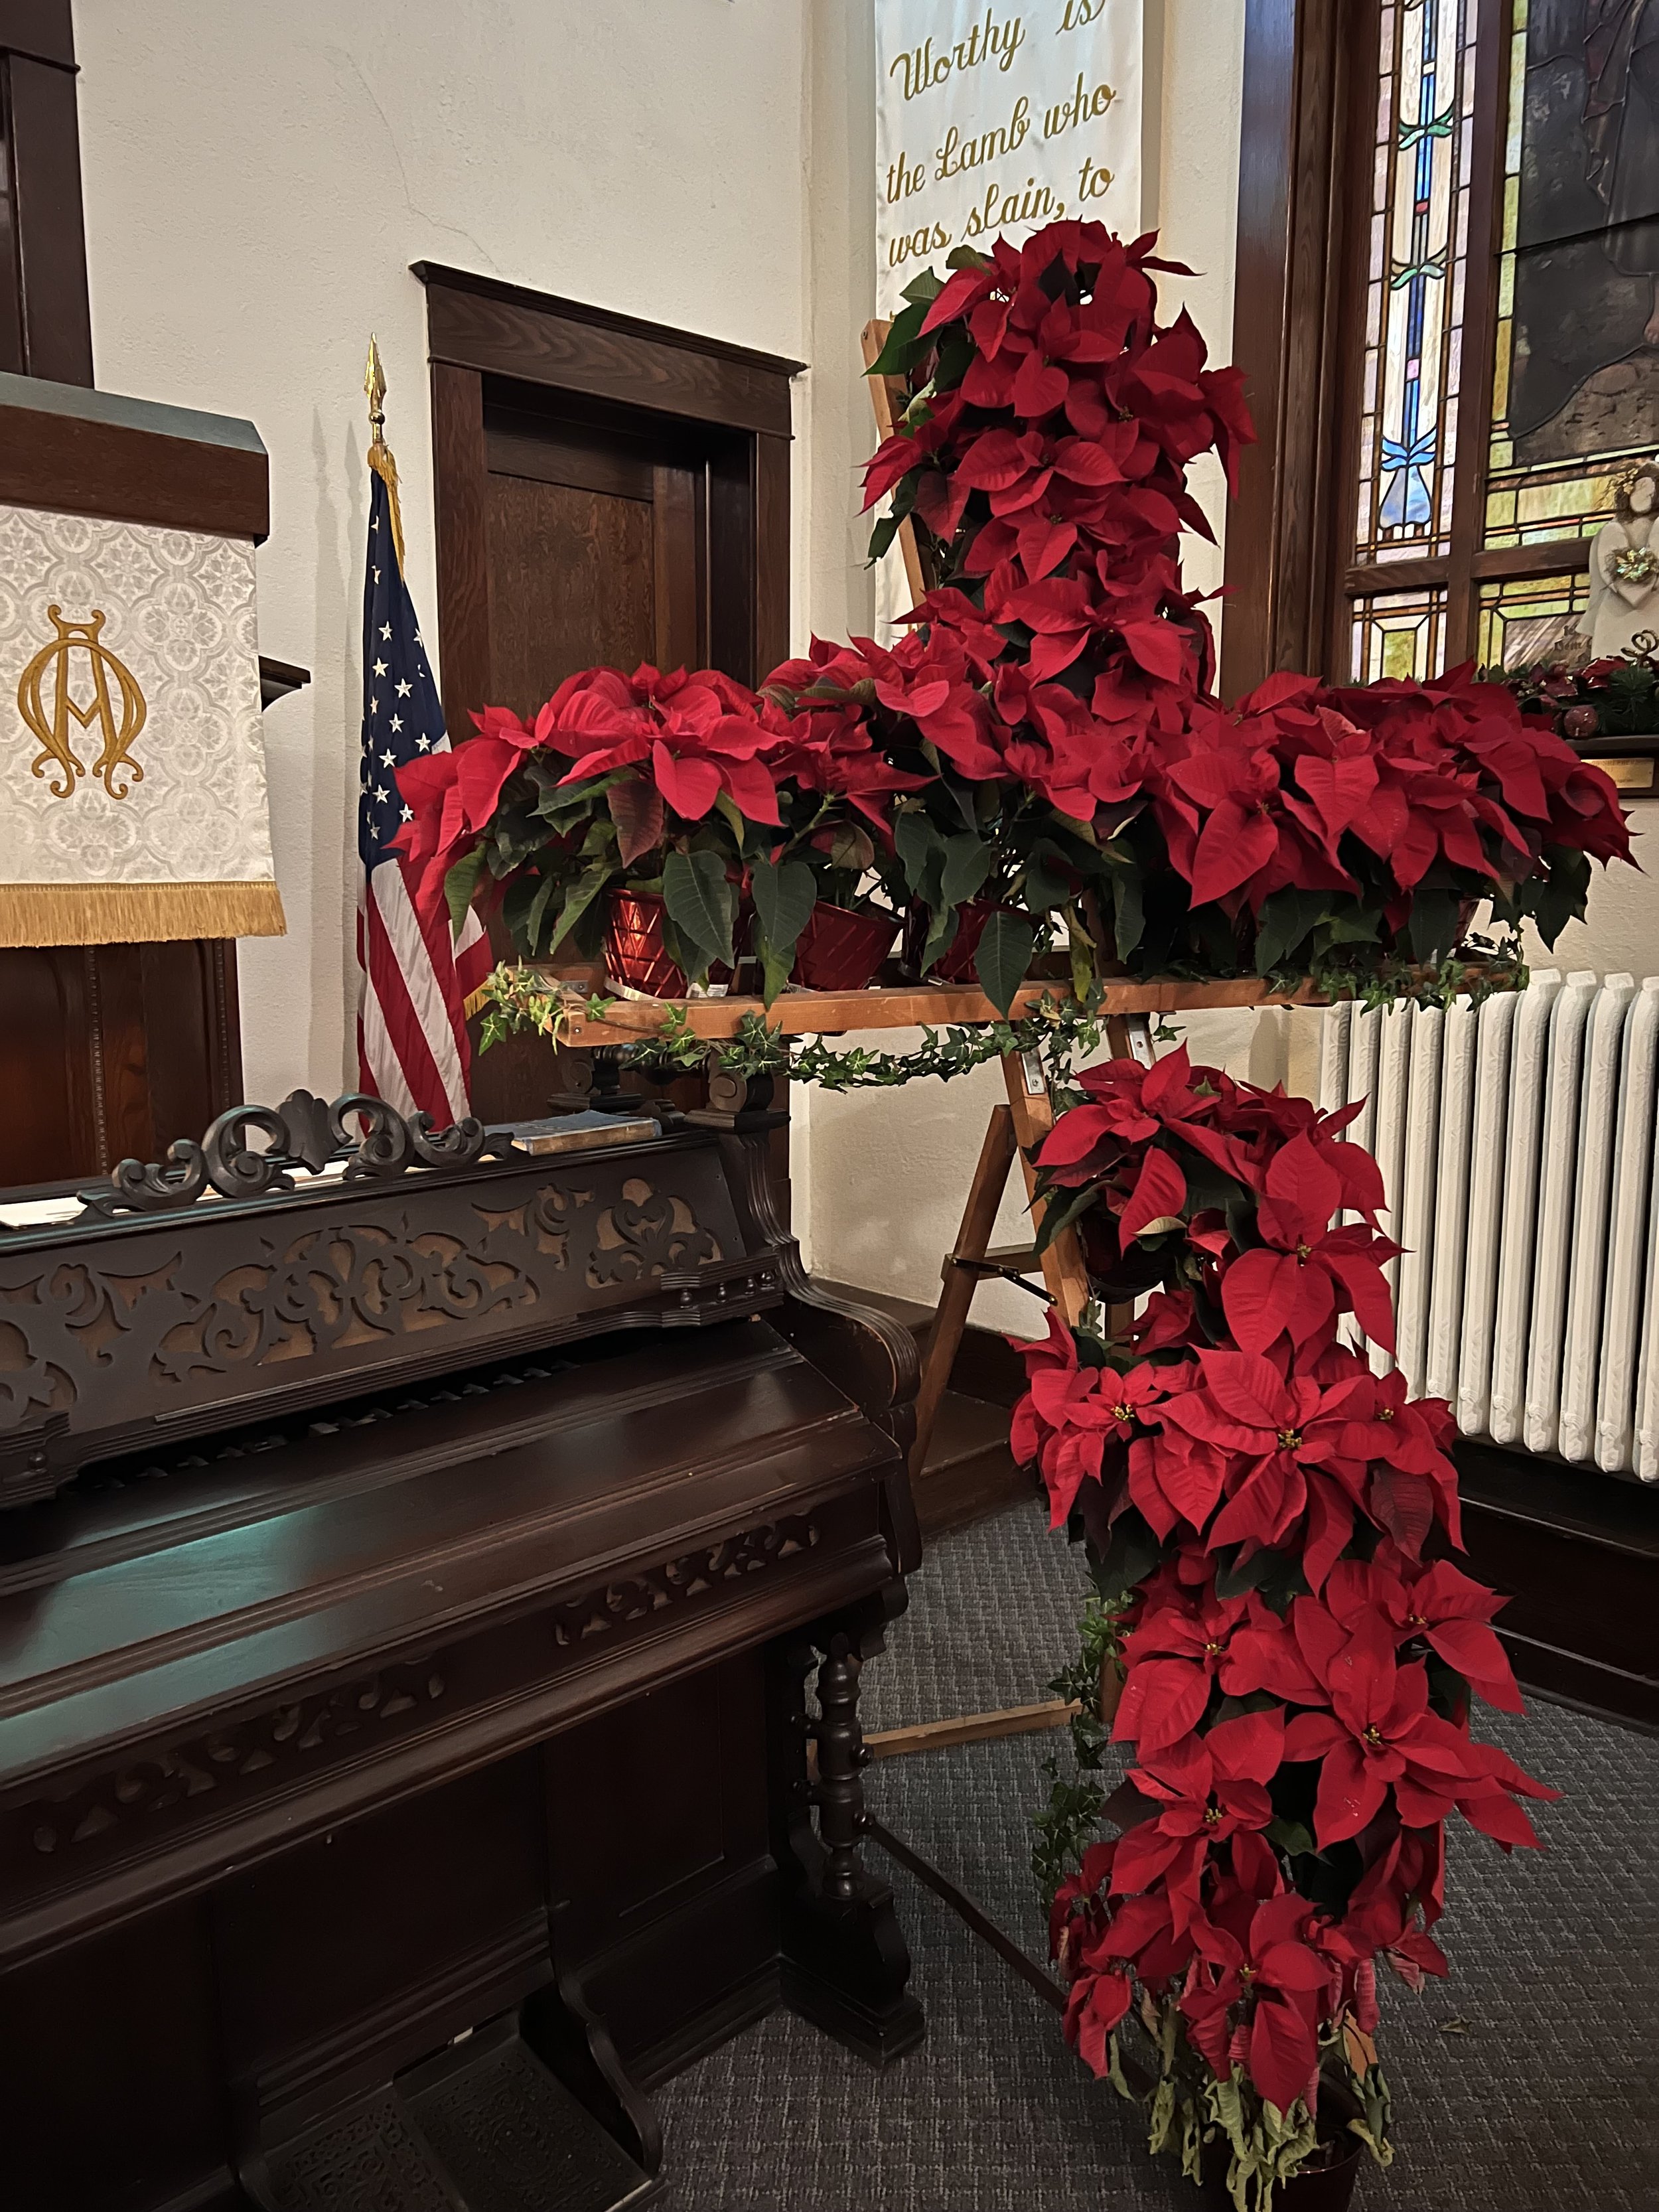 December 25, 2022 - Christmas Day at St. Paul